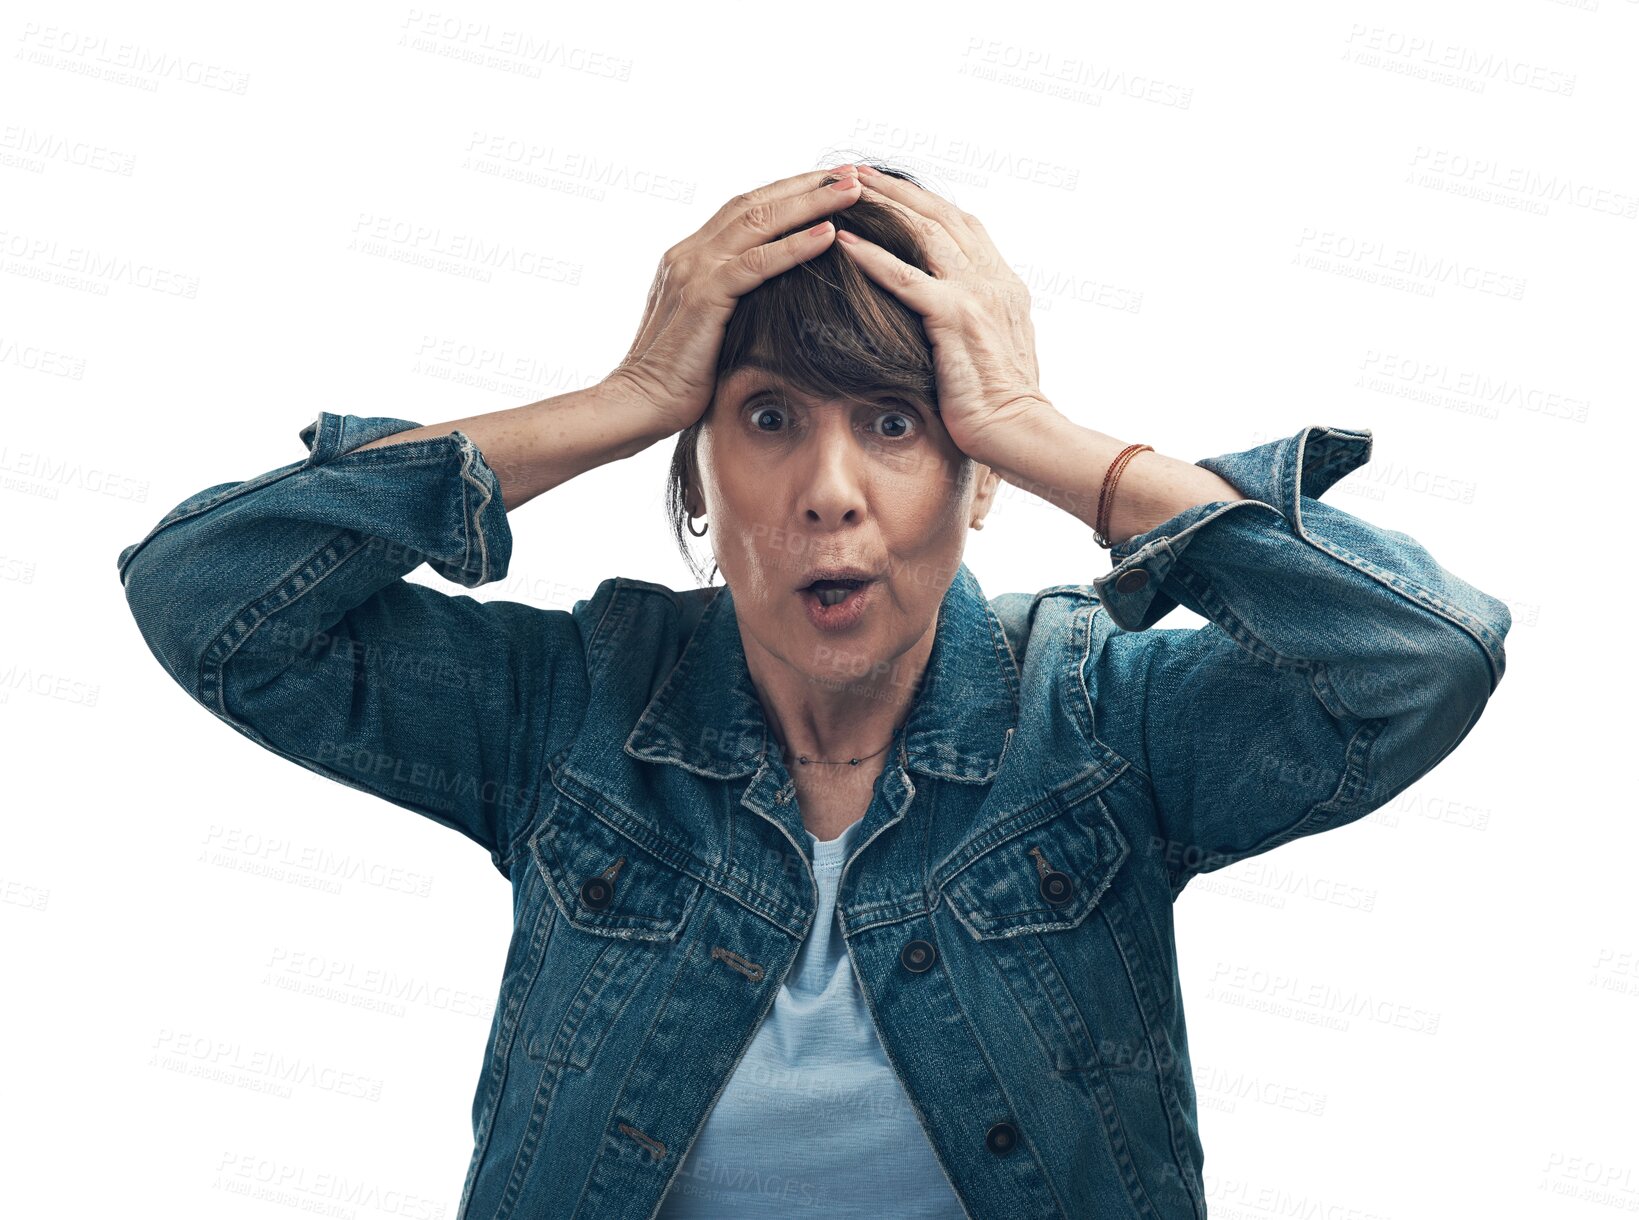 Buy stock photo Face, portrait of a shocked woman isolated and against a transparent png background. Bad or good news, confused expression or accident and wow or omg facial reaction of a female person for surprise